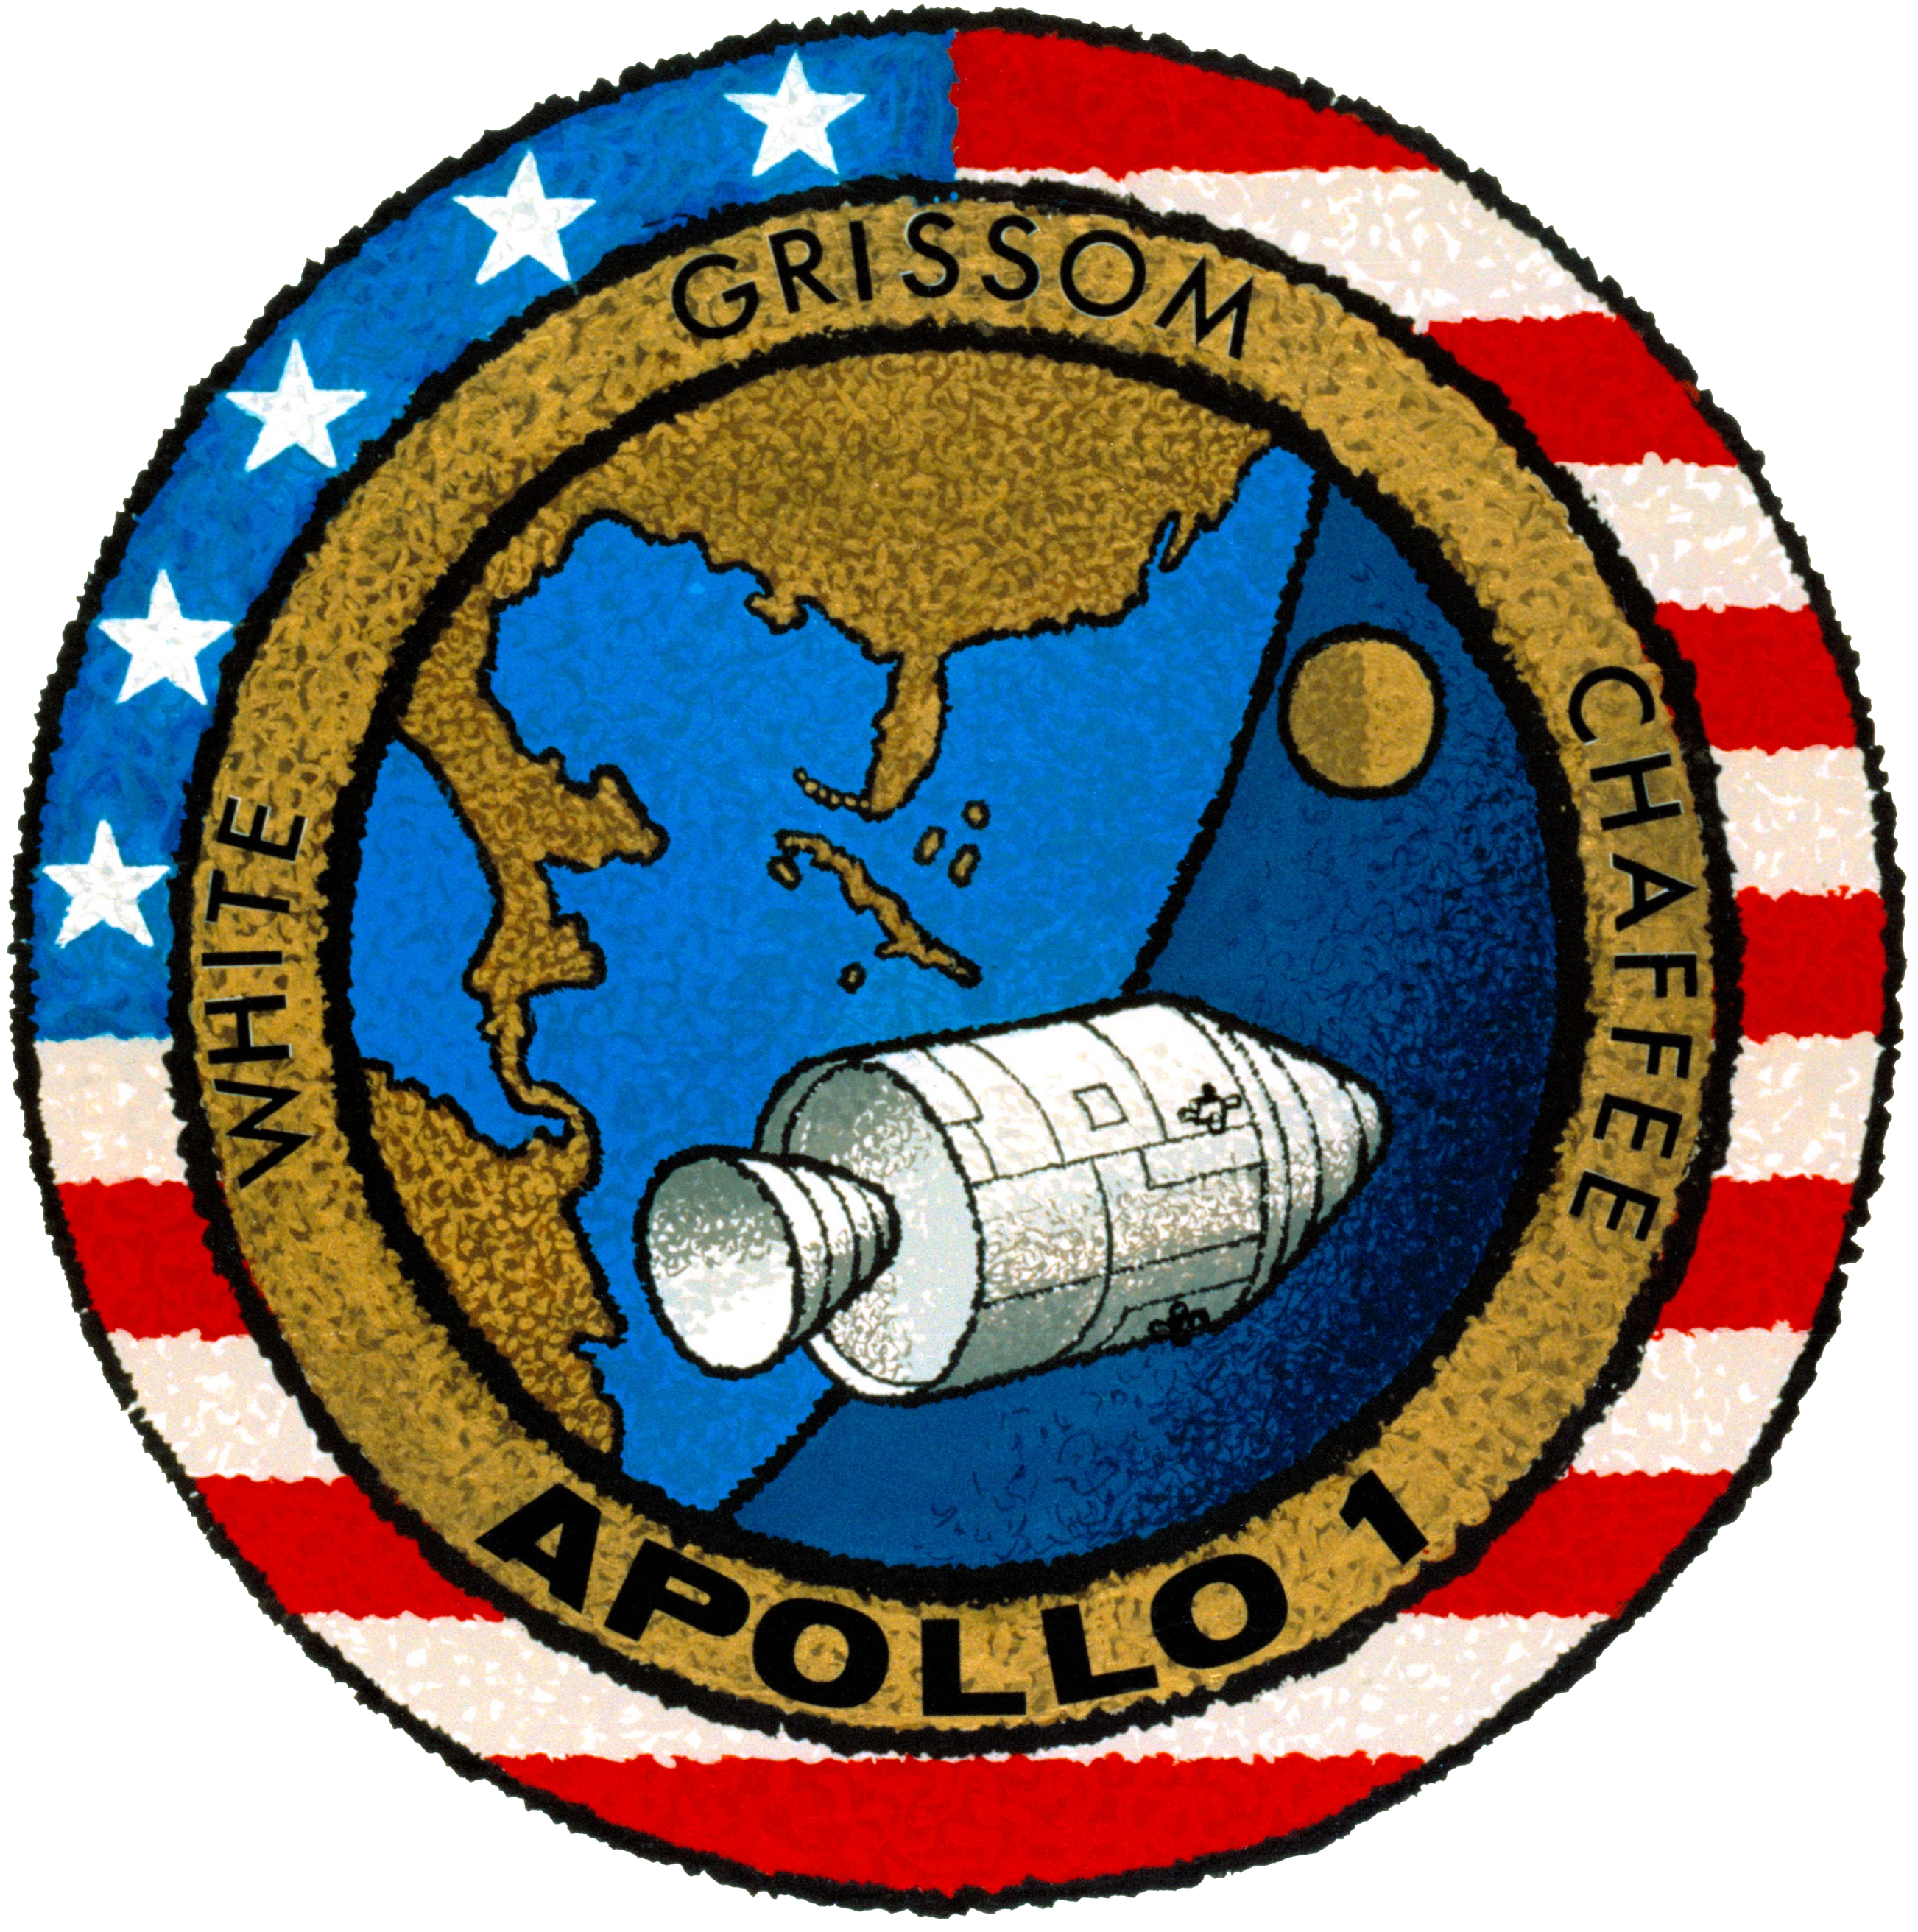 Aviation History | History of Flight | Aviation History Articles, Warbirds, Bombers, Trainers, Pilots | On this Day, Remembering Apollo!